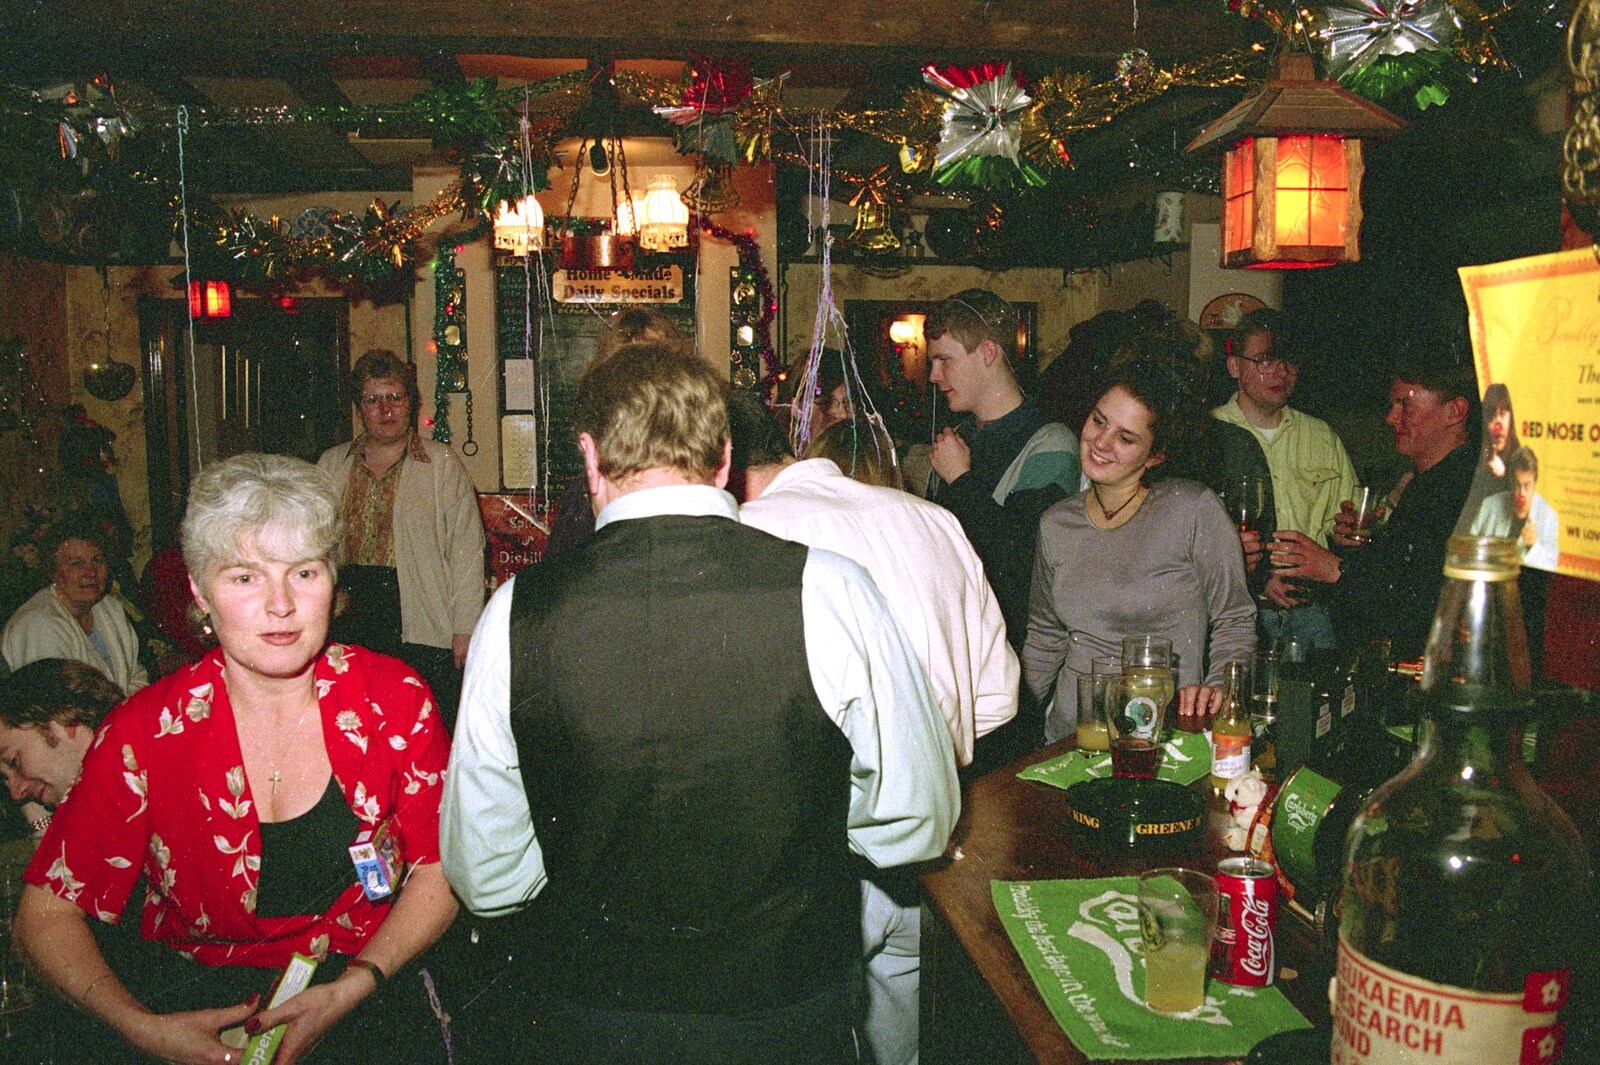 New Year crowds in the Swan from New Year's Eve in the Swan Inn, Brome, Suffolk - 31st December 1995